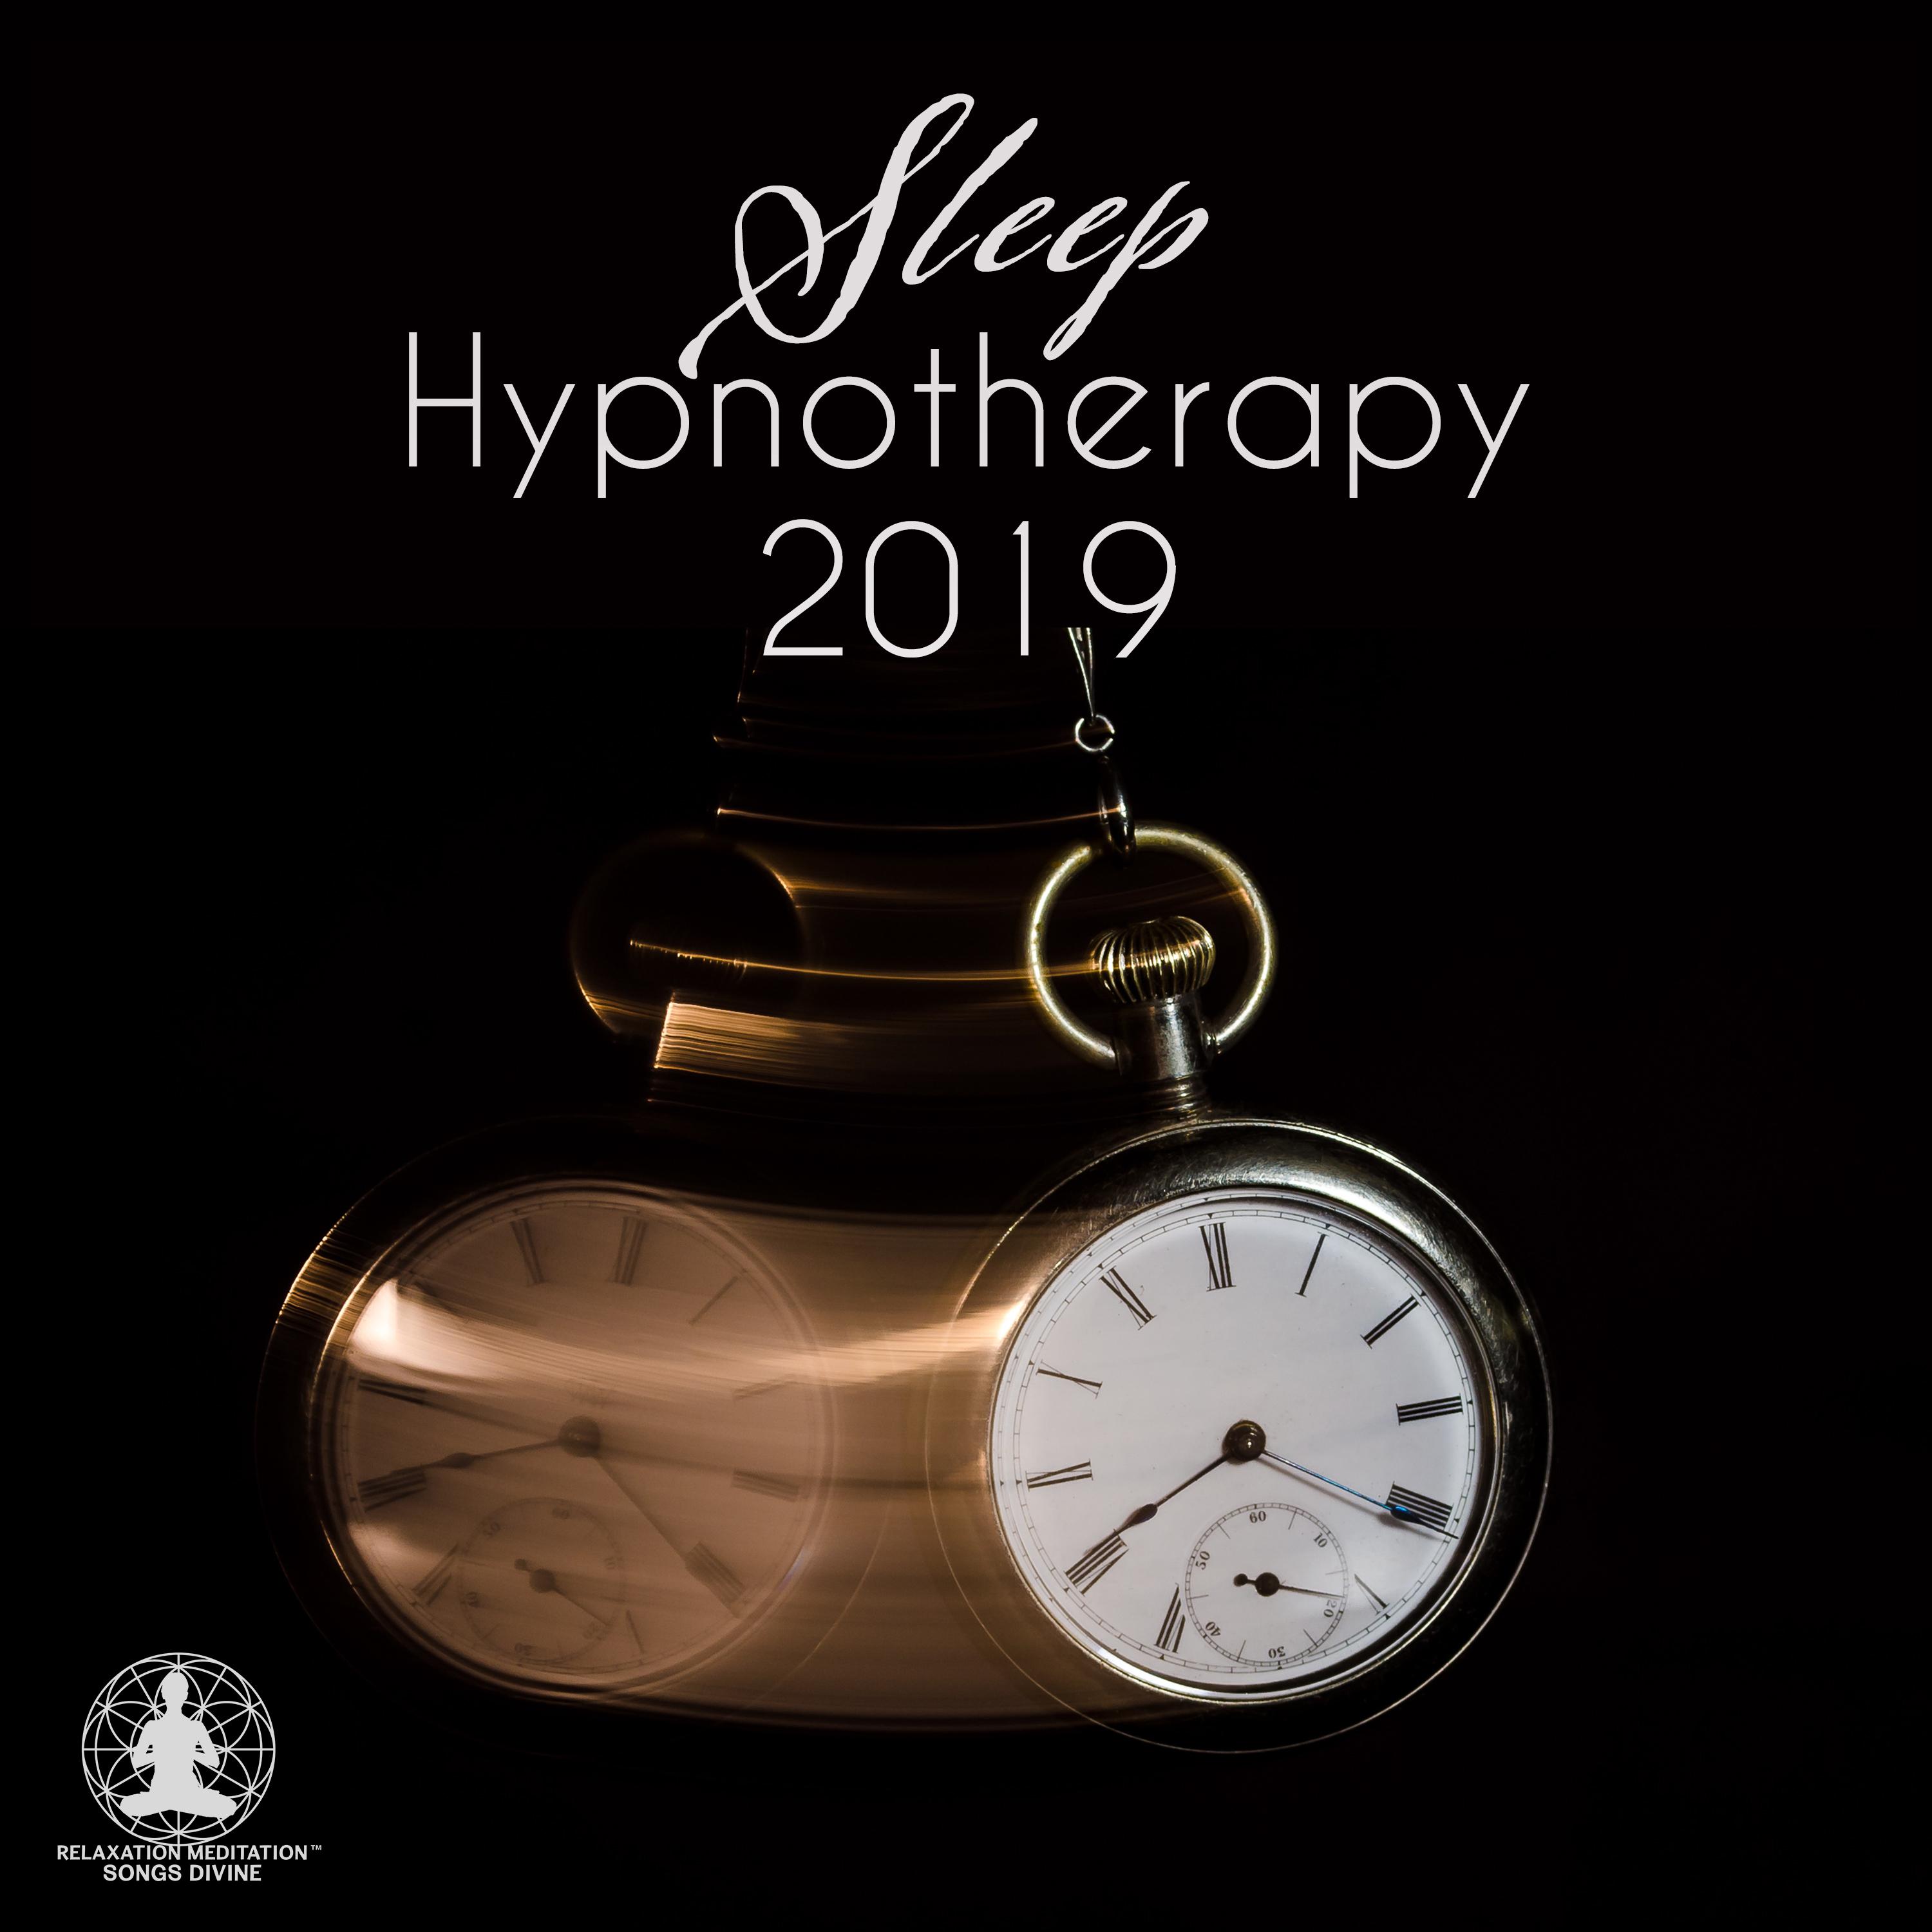 Sleep Hypnotherapy 2019 (Soothing Night Atmosphere)